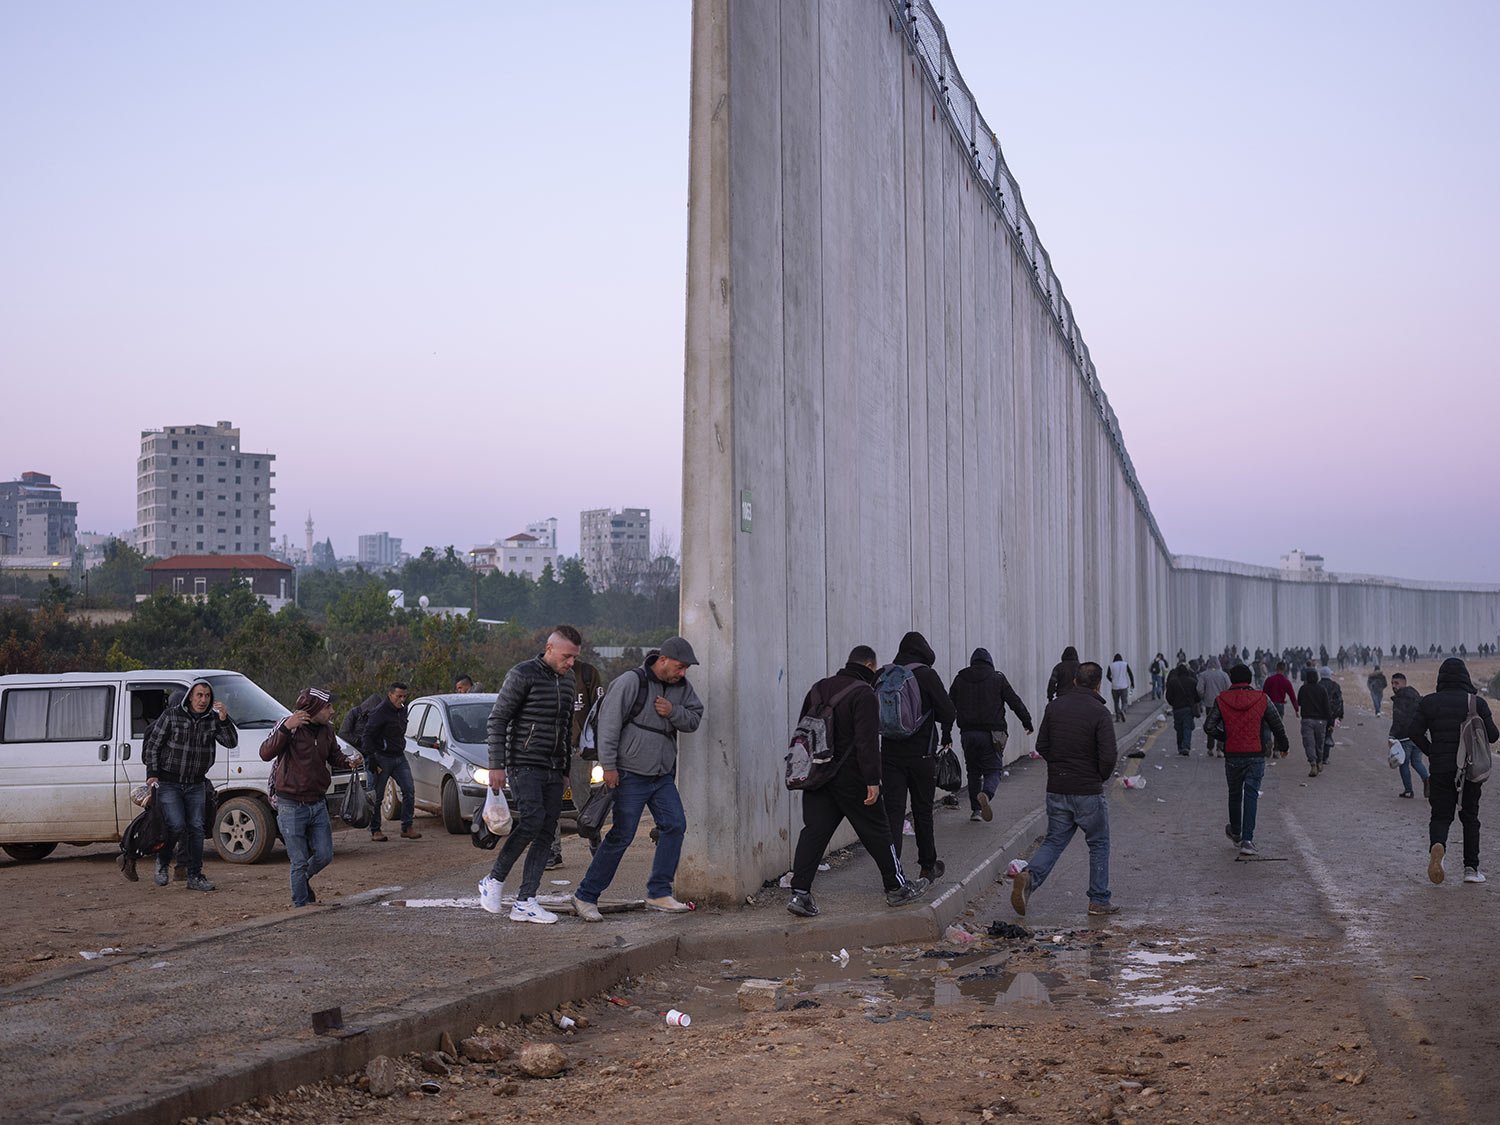  Palestinians cross into Israel from the West Bank through an opening in the Israeli separation barrier between the West Bank town of Qalqilya and the Israeli Kibbutz Eyal, Feb. 27, 2022. (AP Photo/Oded Balilty) 